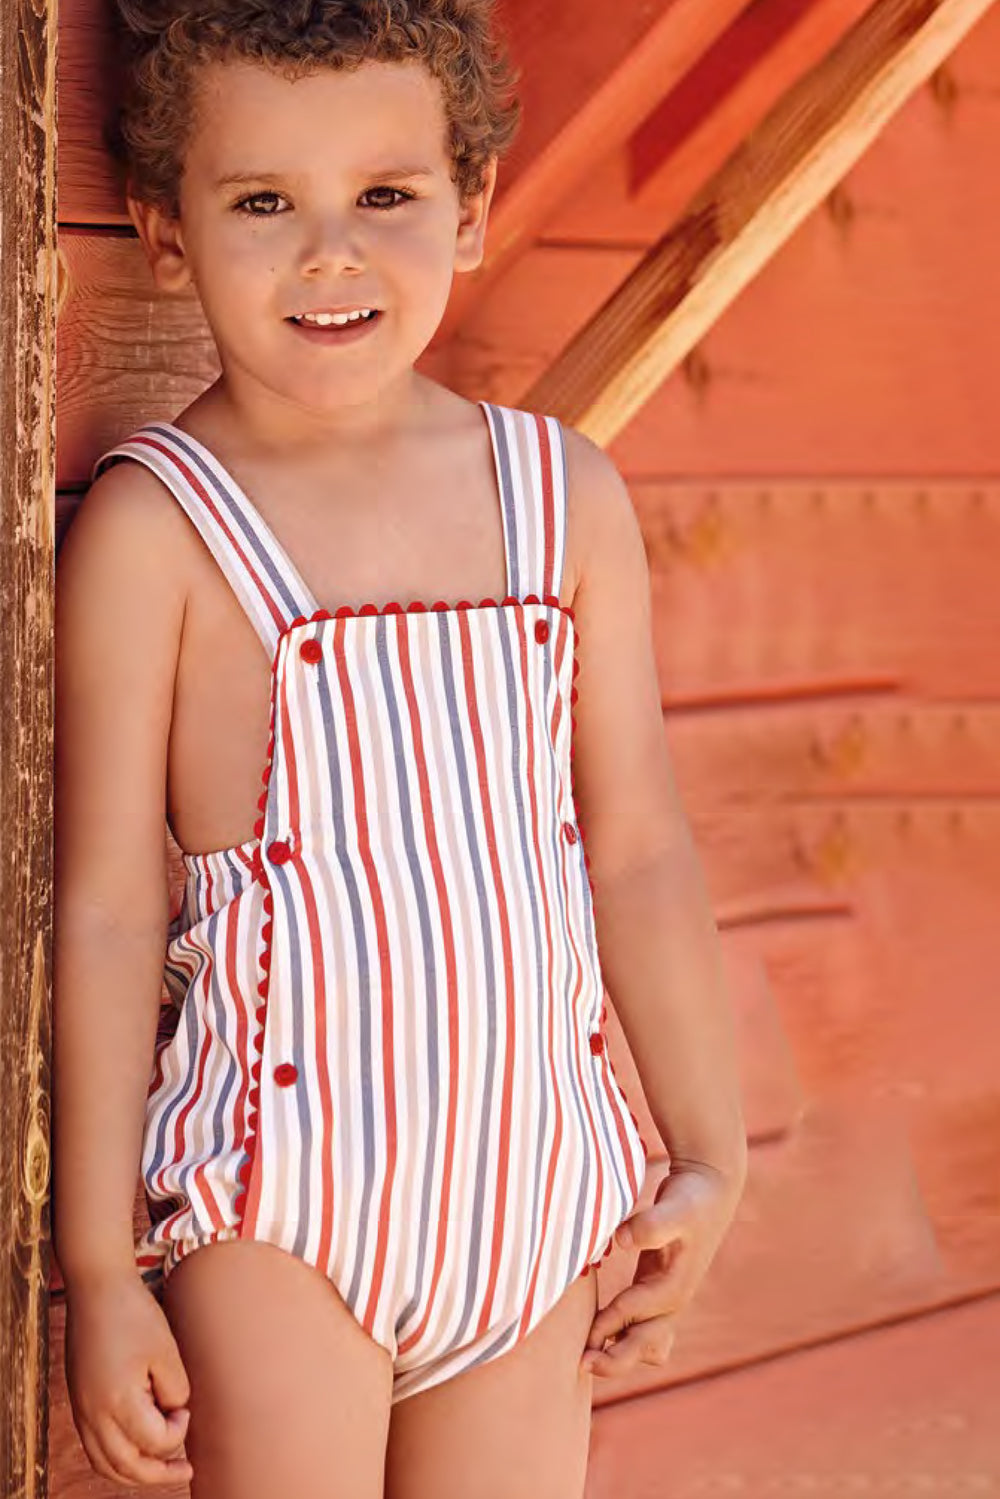 Juliana "Lenny" Red Striped Dungaree Romper | iphoneandroidapplications